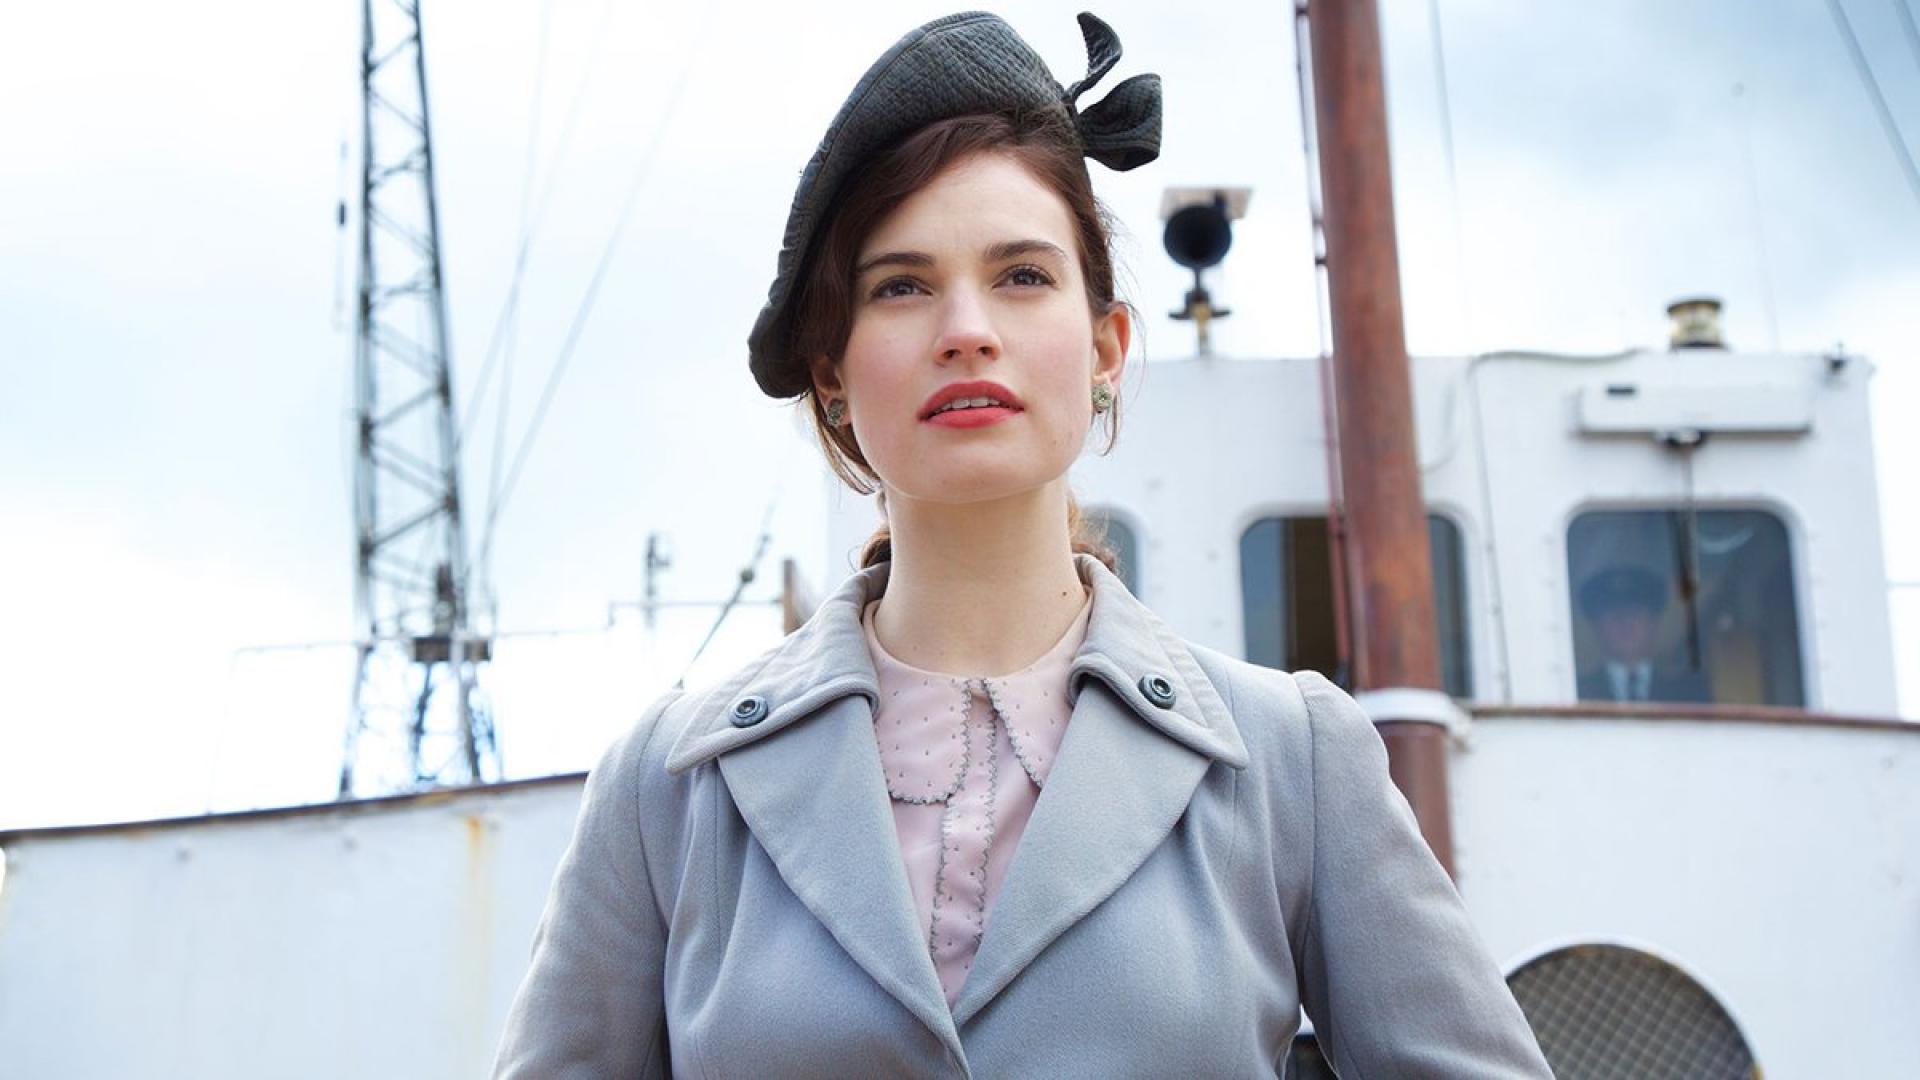 Watch 'Downton Abbey's' Lily James in the for 'The Guernsey